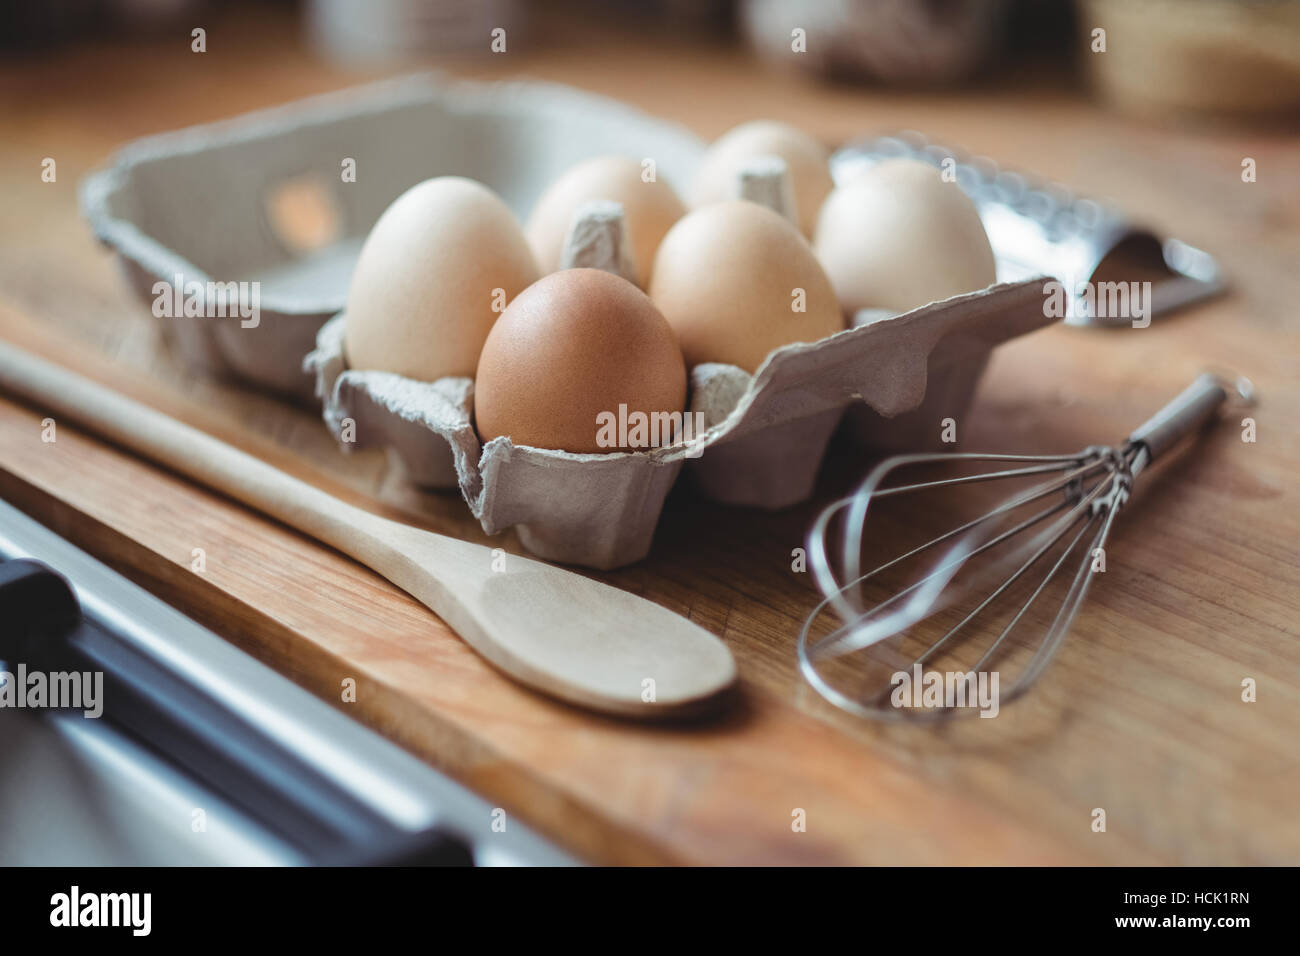 Eggs, whisker and wooden spoon on table Stock Photo